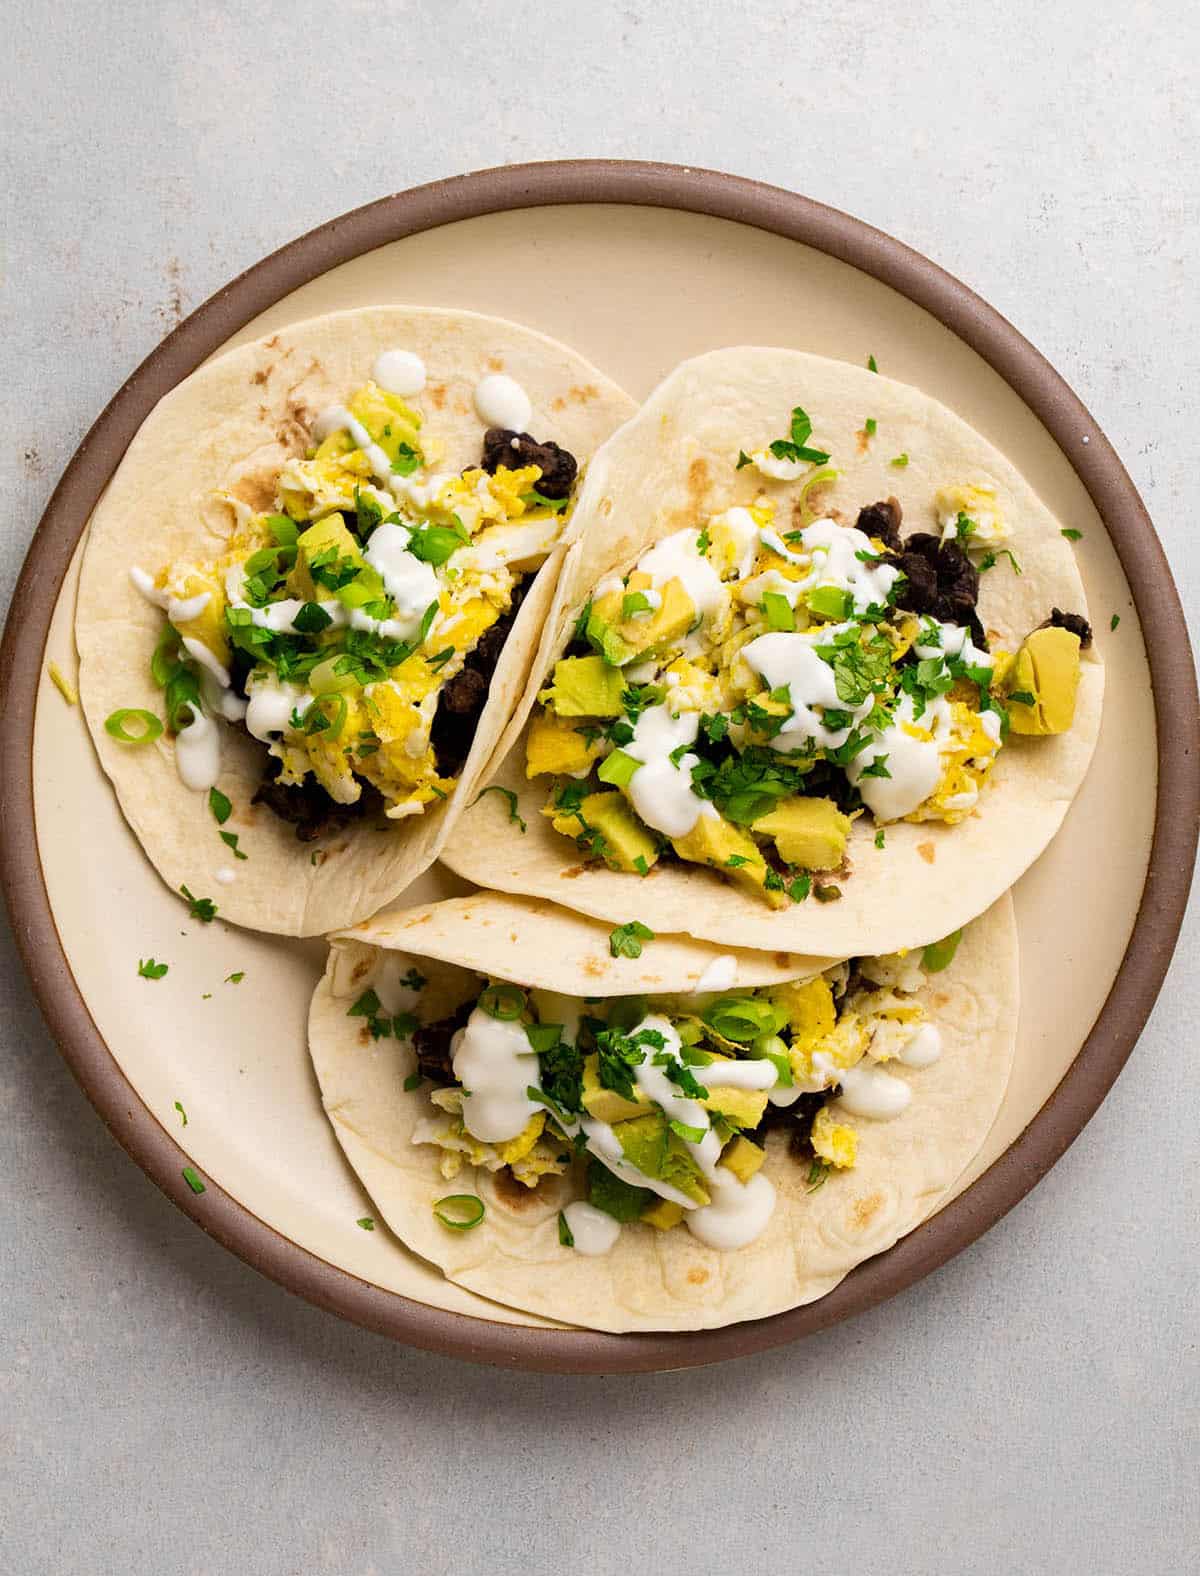 Three tacos with scrambled eggs on a large plate.